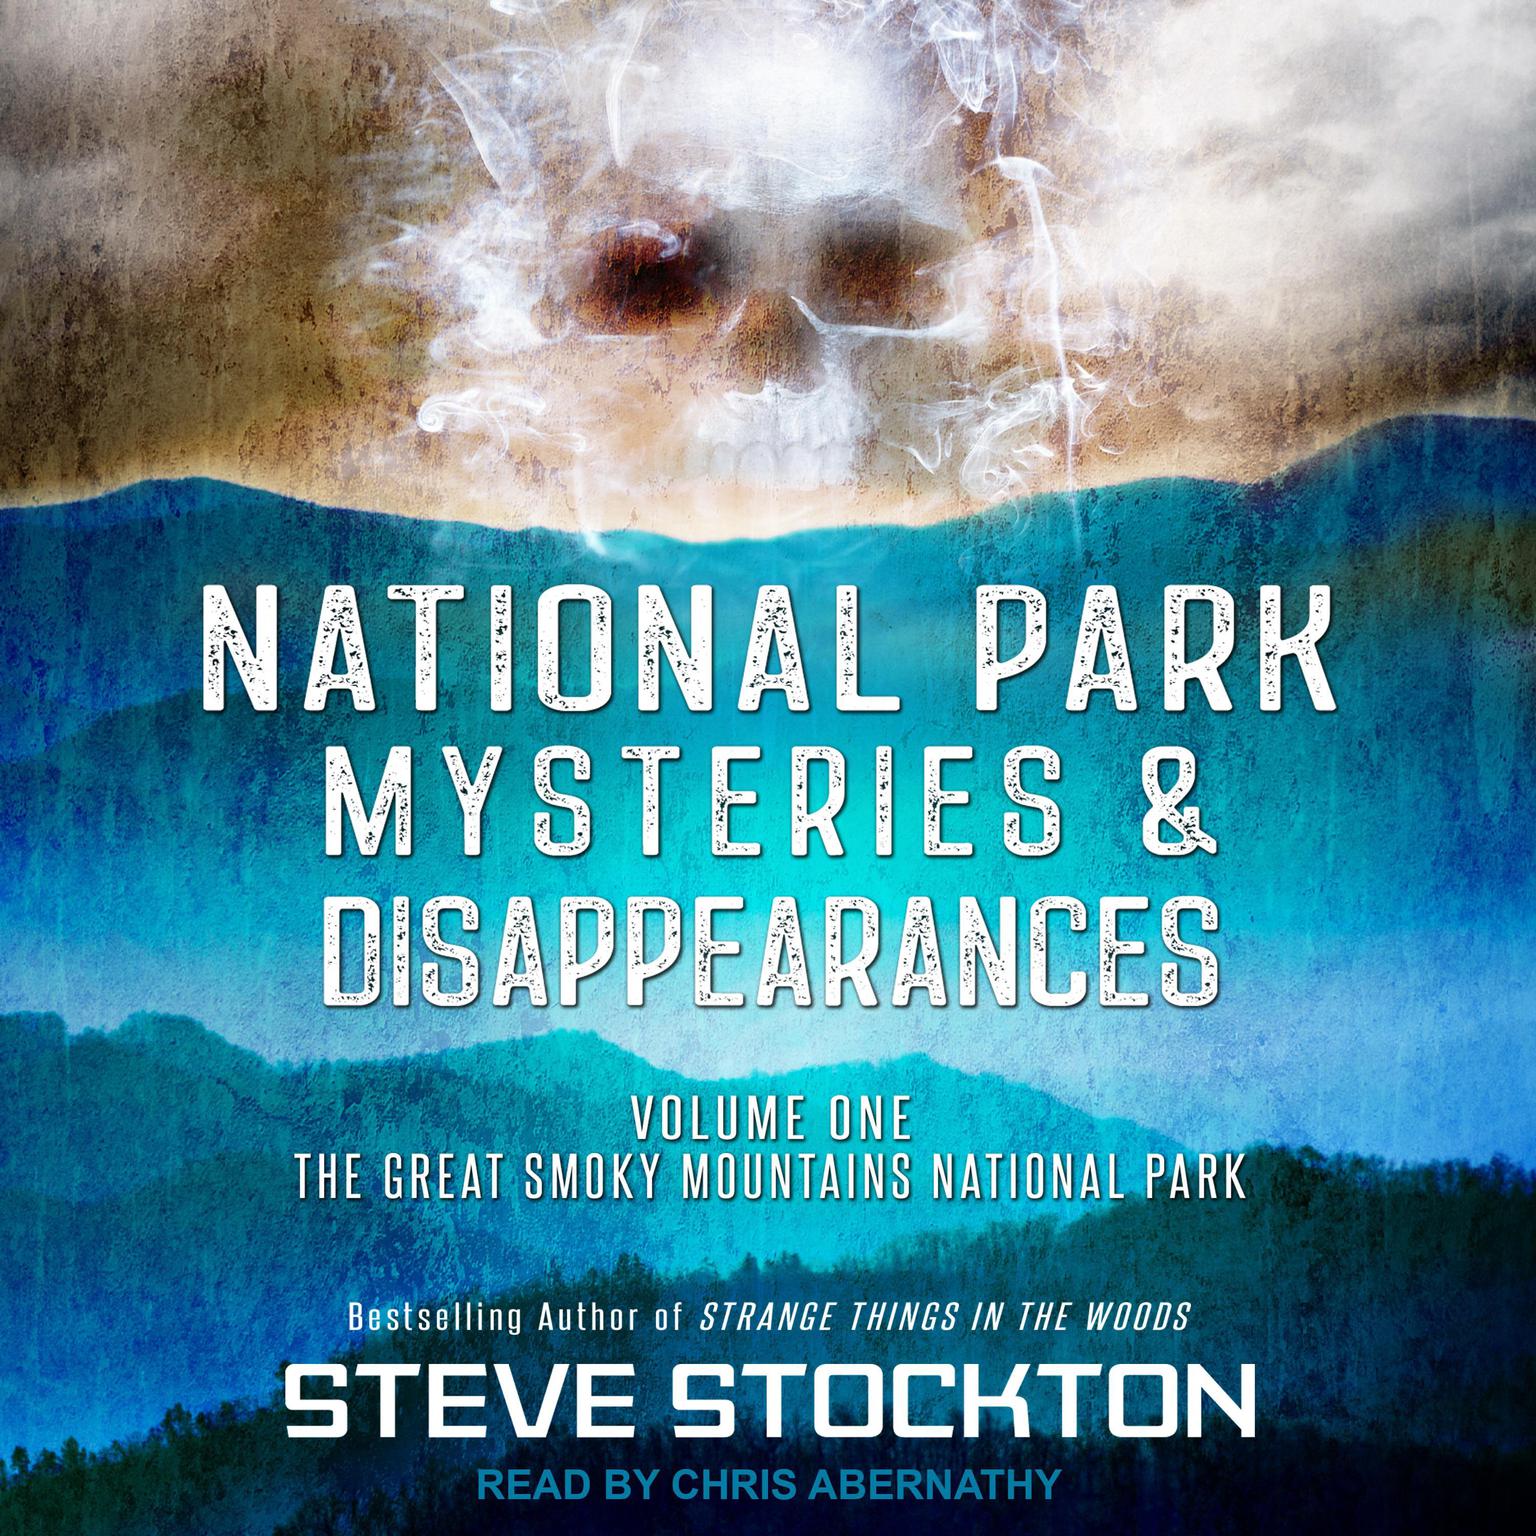 National Park Mysteries & Disappearances: The Great Smoky Mountains National Park Audiobook, by Steve Stockton